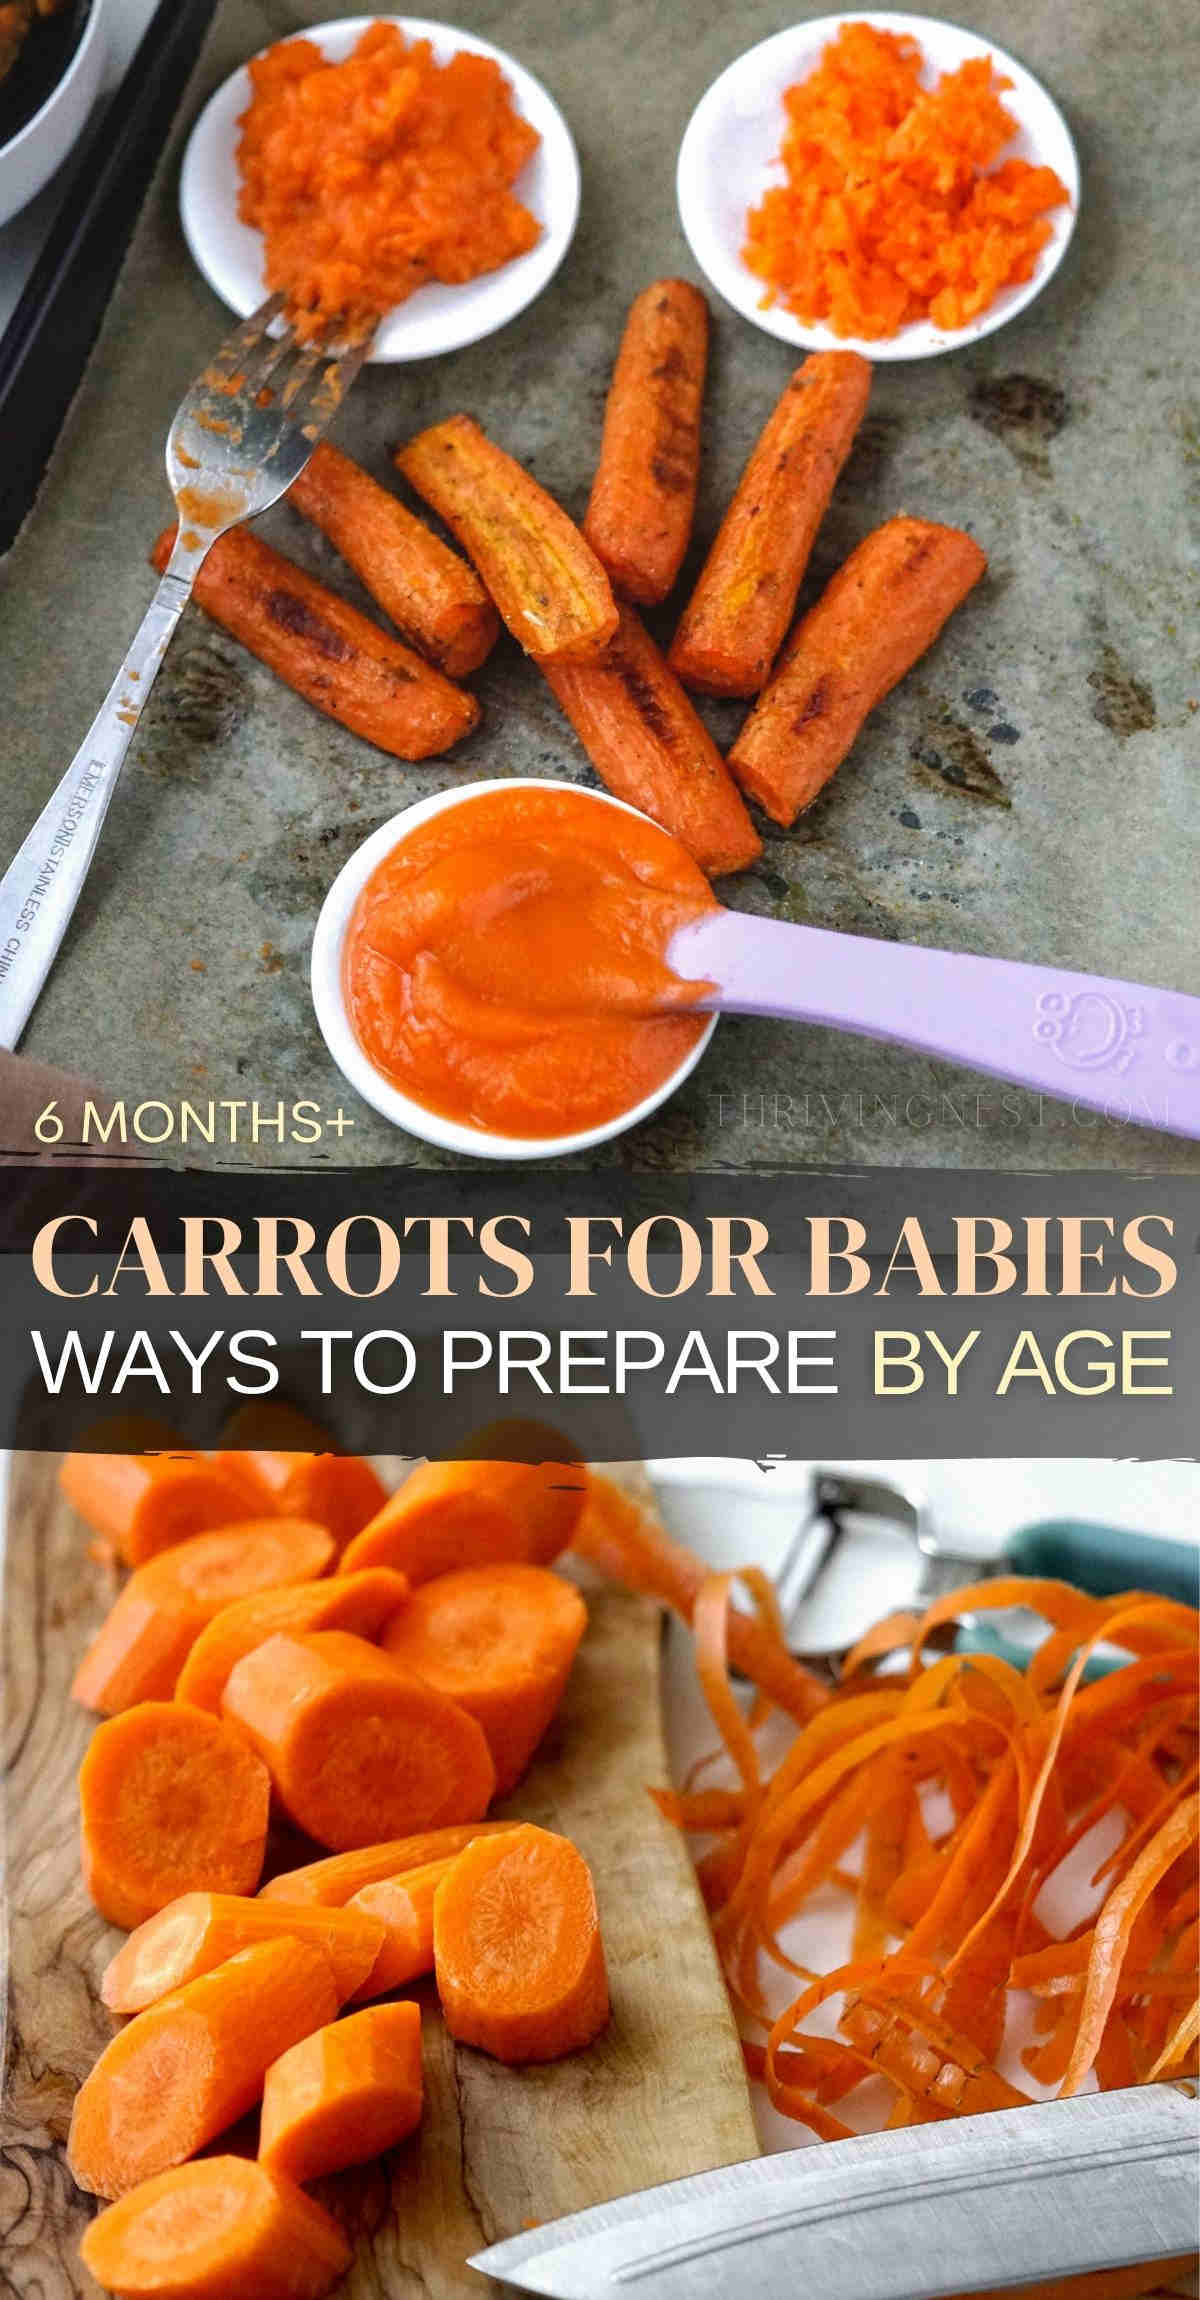 Carrots for babies make the perfect first solid baby food beginning with 6 months of age. Learn how to prepare baby's first carrots whether they’re steamed, puréed, mashed, grated or roasted and serve according to baby's age and needs. Plus the best way to cook carrots for babies to retaining their nutrients, taste and texture. #carrotsforbabies #carrotsforbaby #carrotbabyfood #carrotbabyrecipes #carrotbabyfood #carrotblw #blw